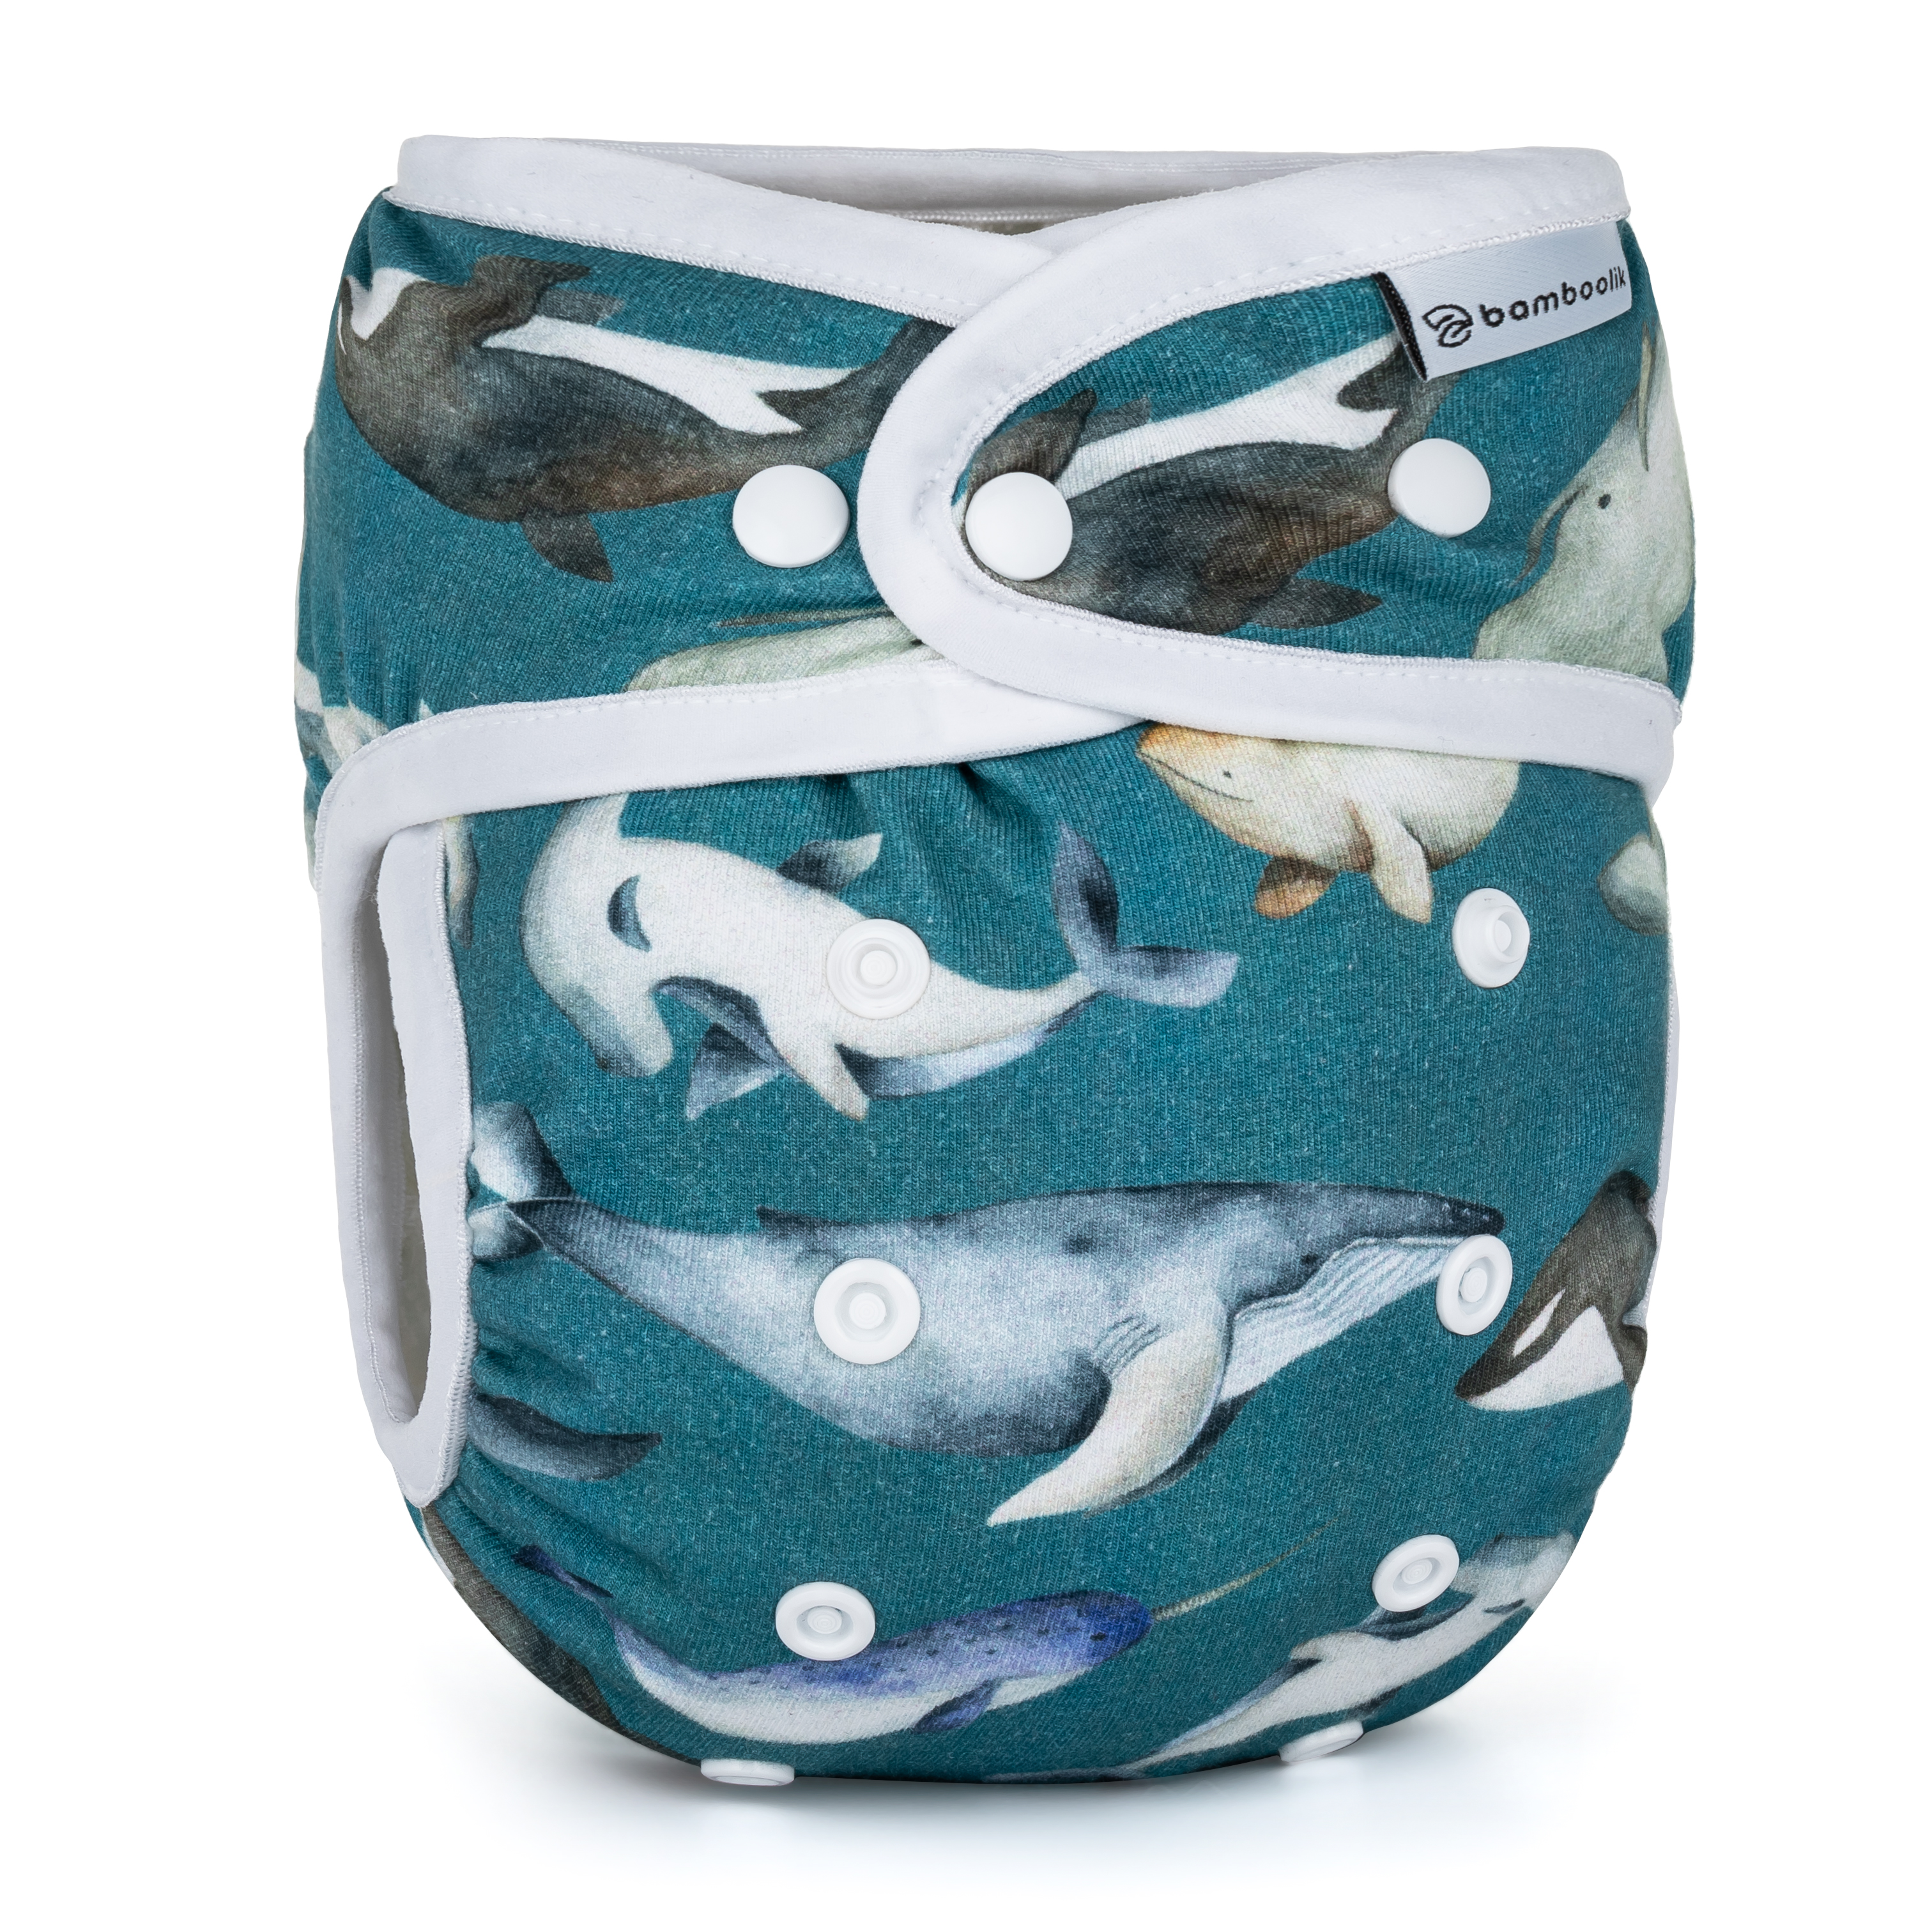 Absorbent layer of cloth diapers. Very absorbent fitted nappies. To be worn with waterproof nappy covers over I Bamboolik